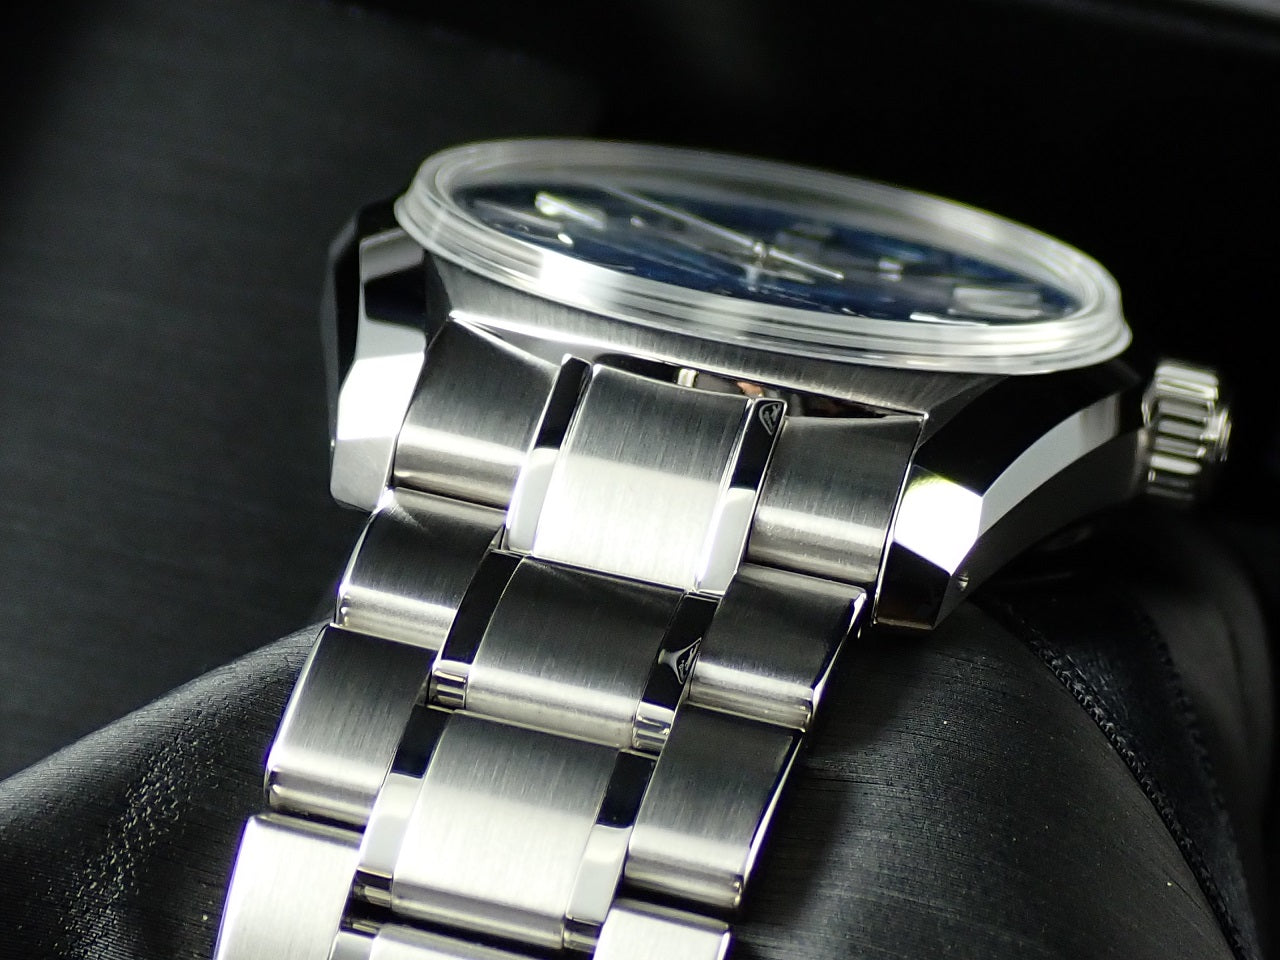 Grand Seiko Heritage Collection Mechanical Hi-Beat 36000 Ginza Limited Edition 2023 &lt;Warranty, Box, etc.&gt;